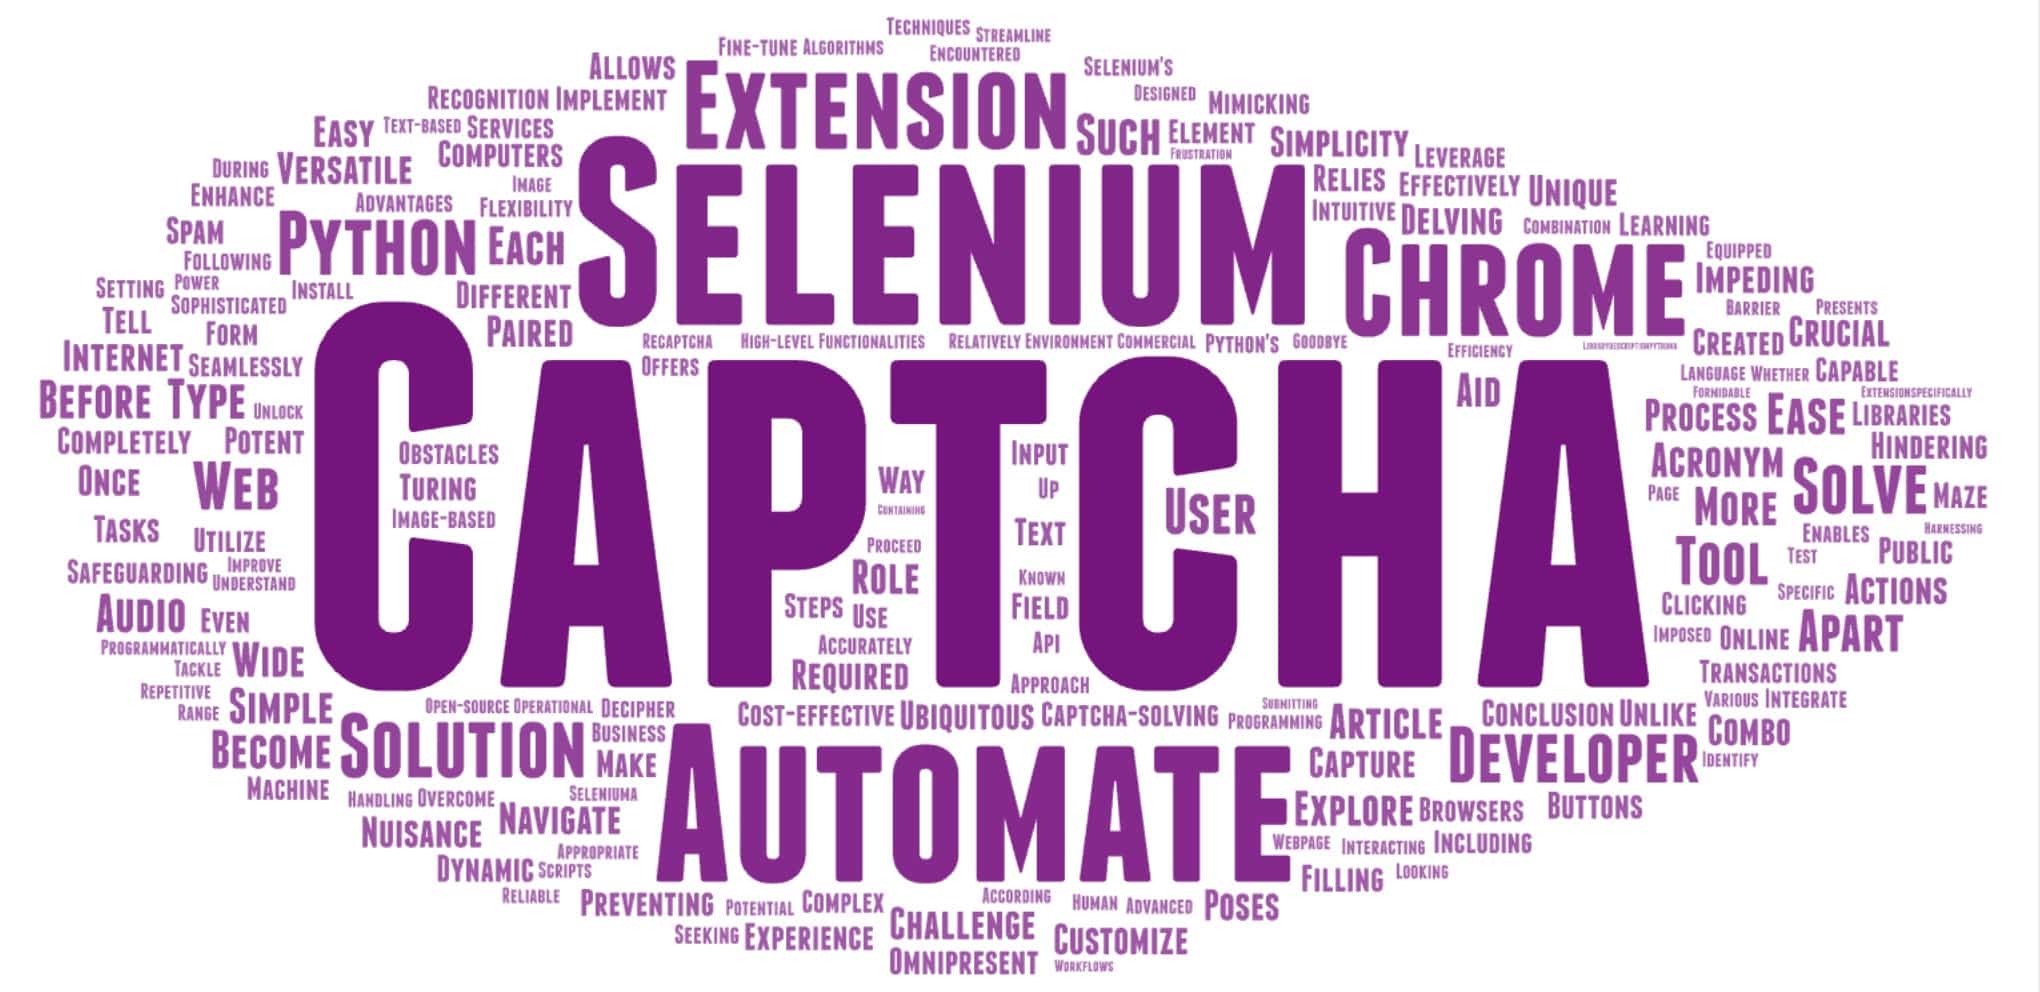 Can Python and Selenium Defeat All Captchas with a Chrome Extension?